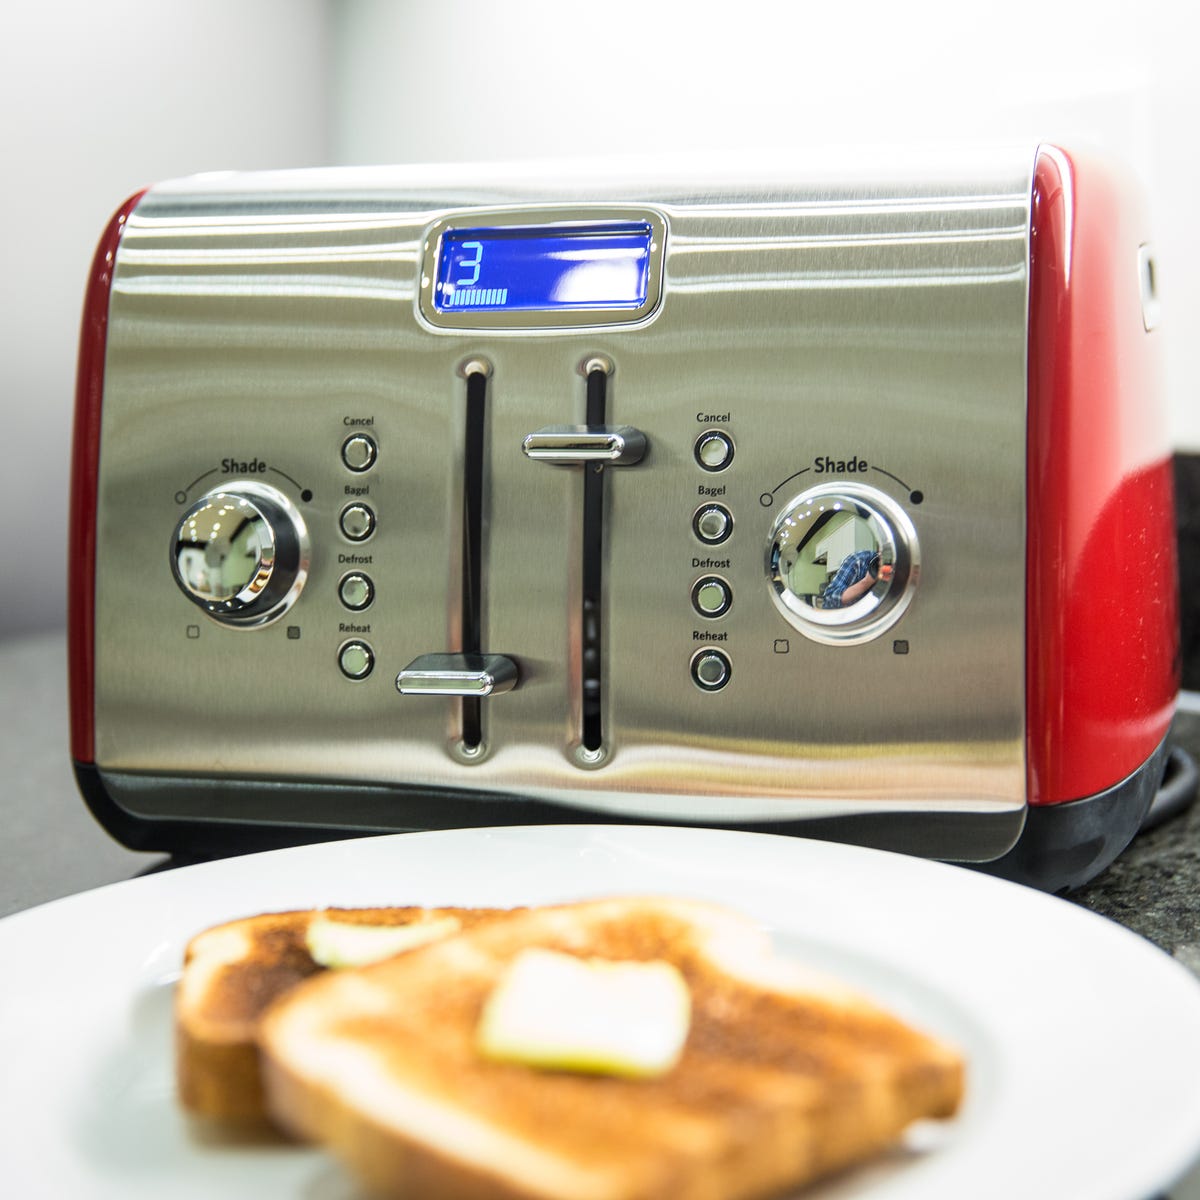 Spild Kong Lear T KitchenAid 4-Slice Manual Toaster review: Make toast slowly, with retro  looks - CNET